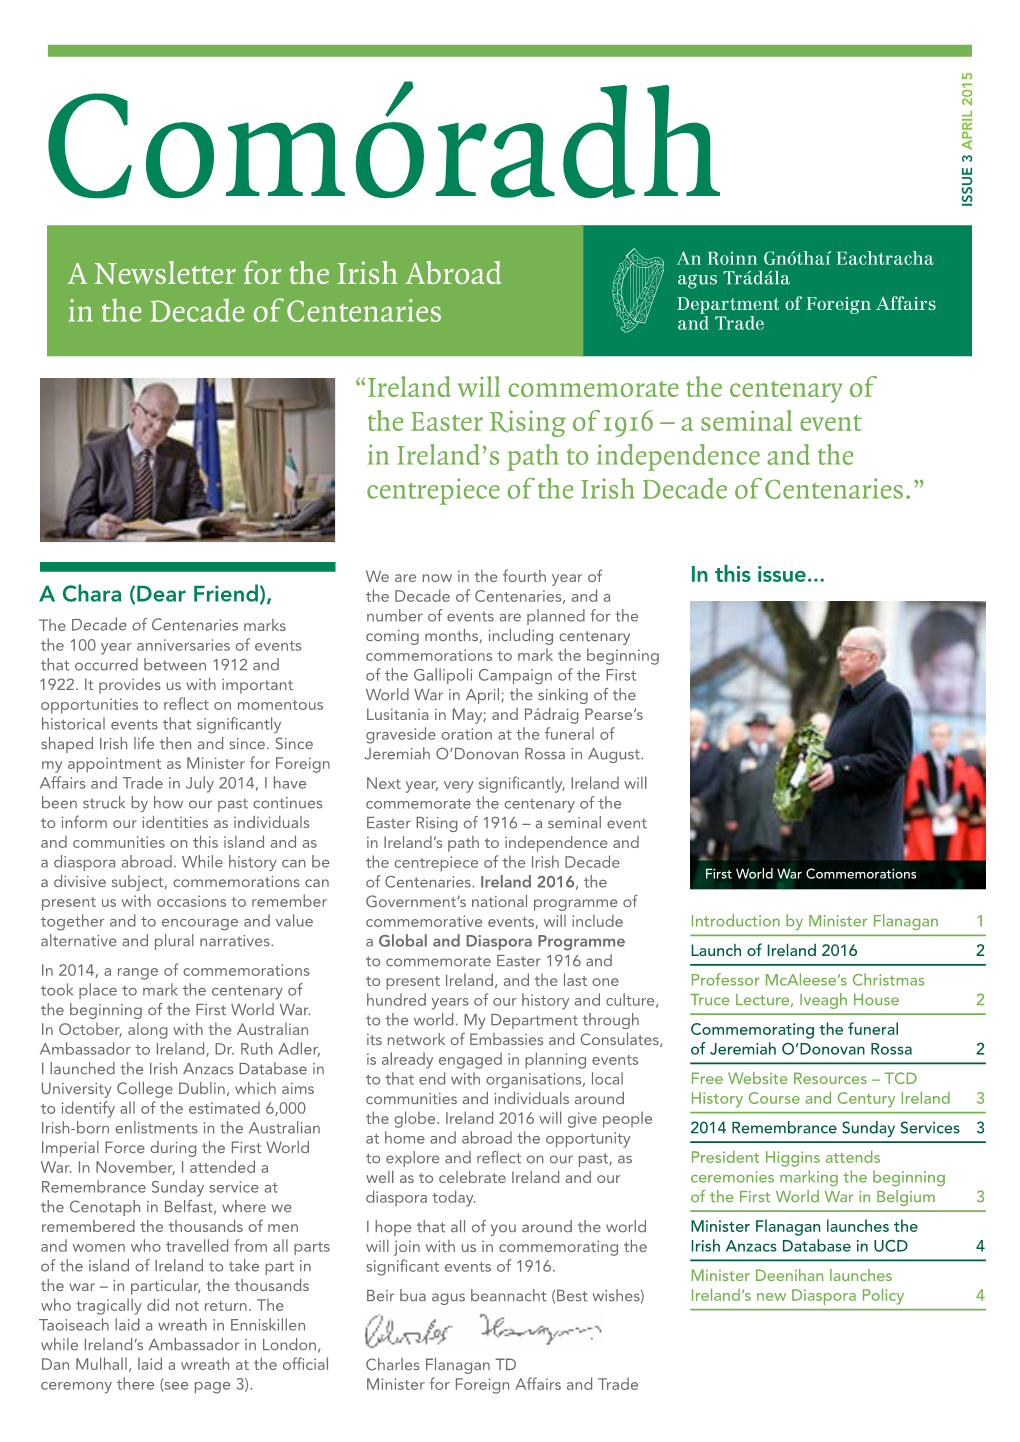 A Newsletter for the Irish Abroad in the Decade of Centenaries